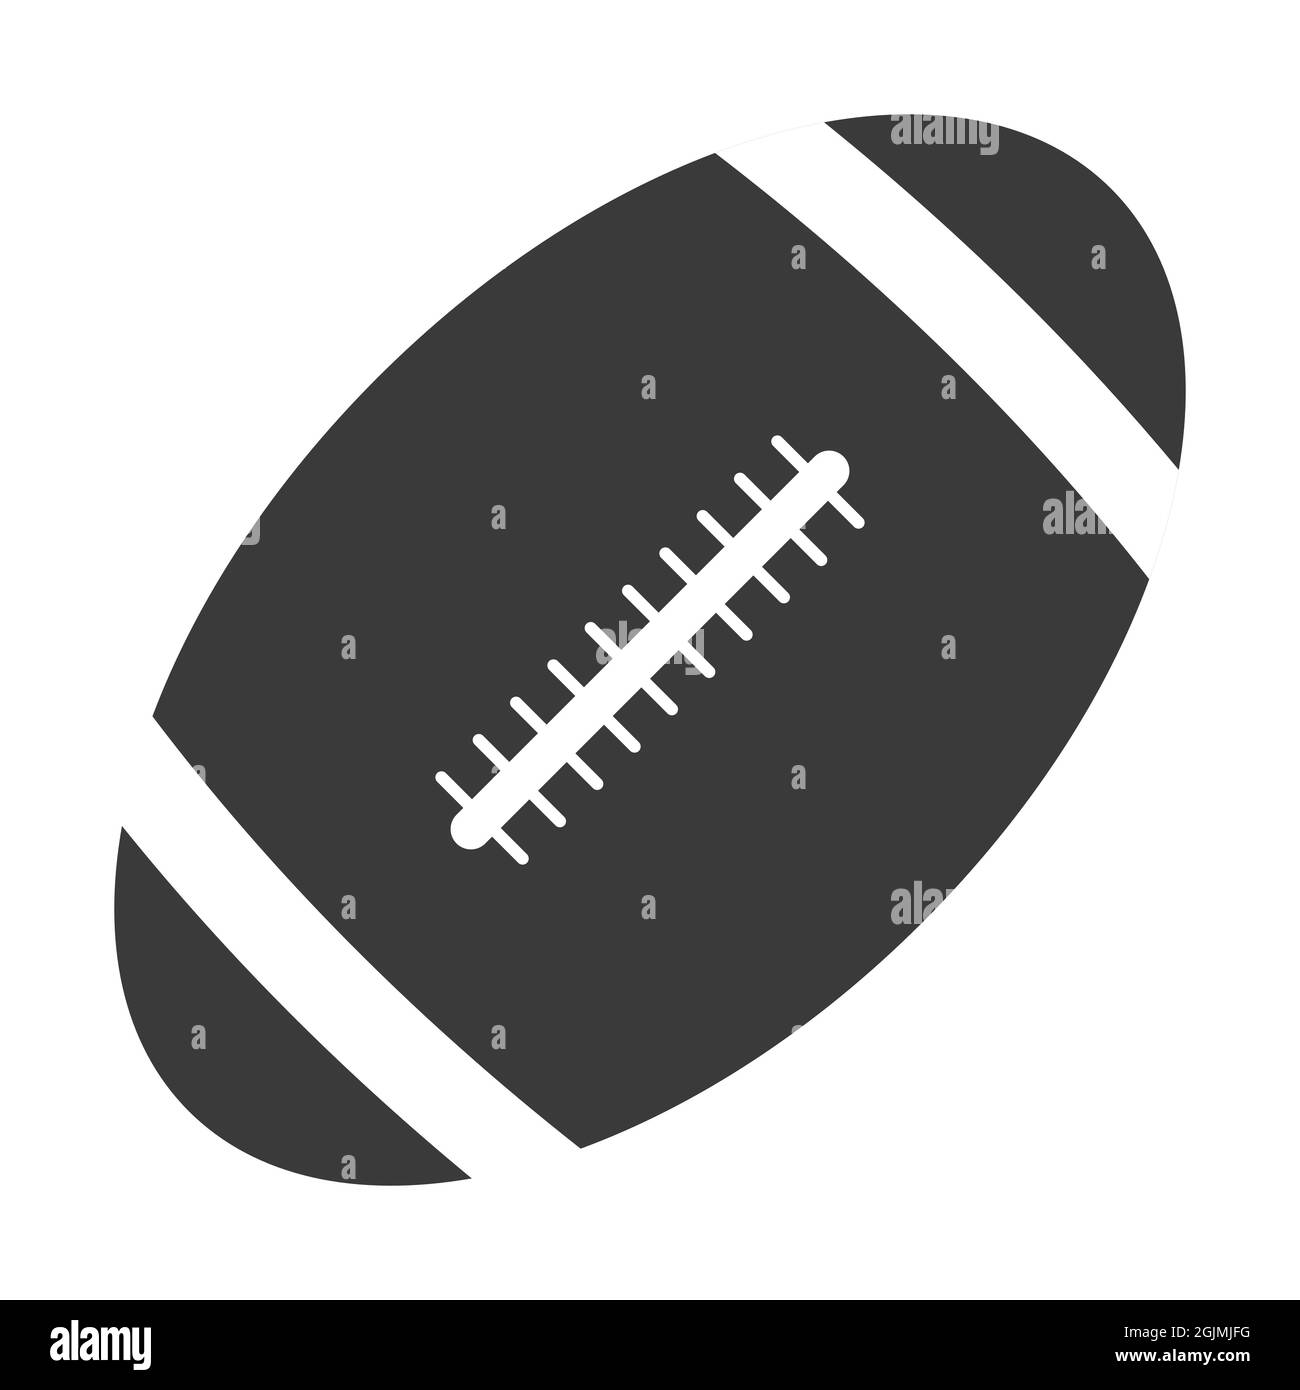 Oval Ball for playing Rugby American football game Stock Vector